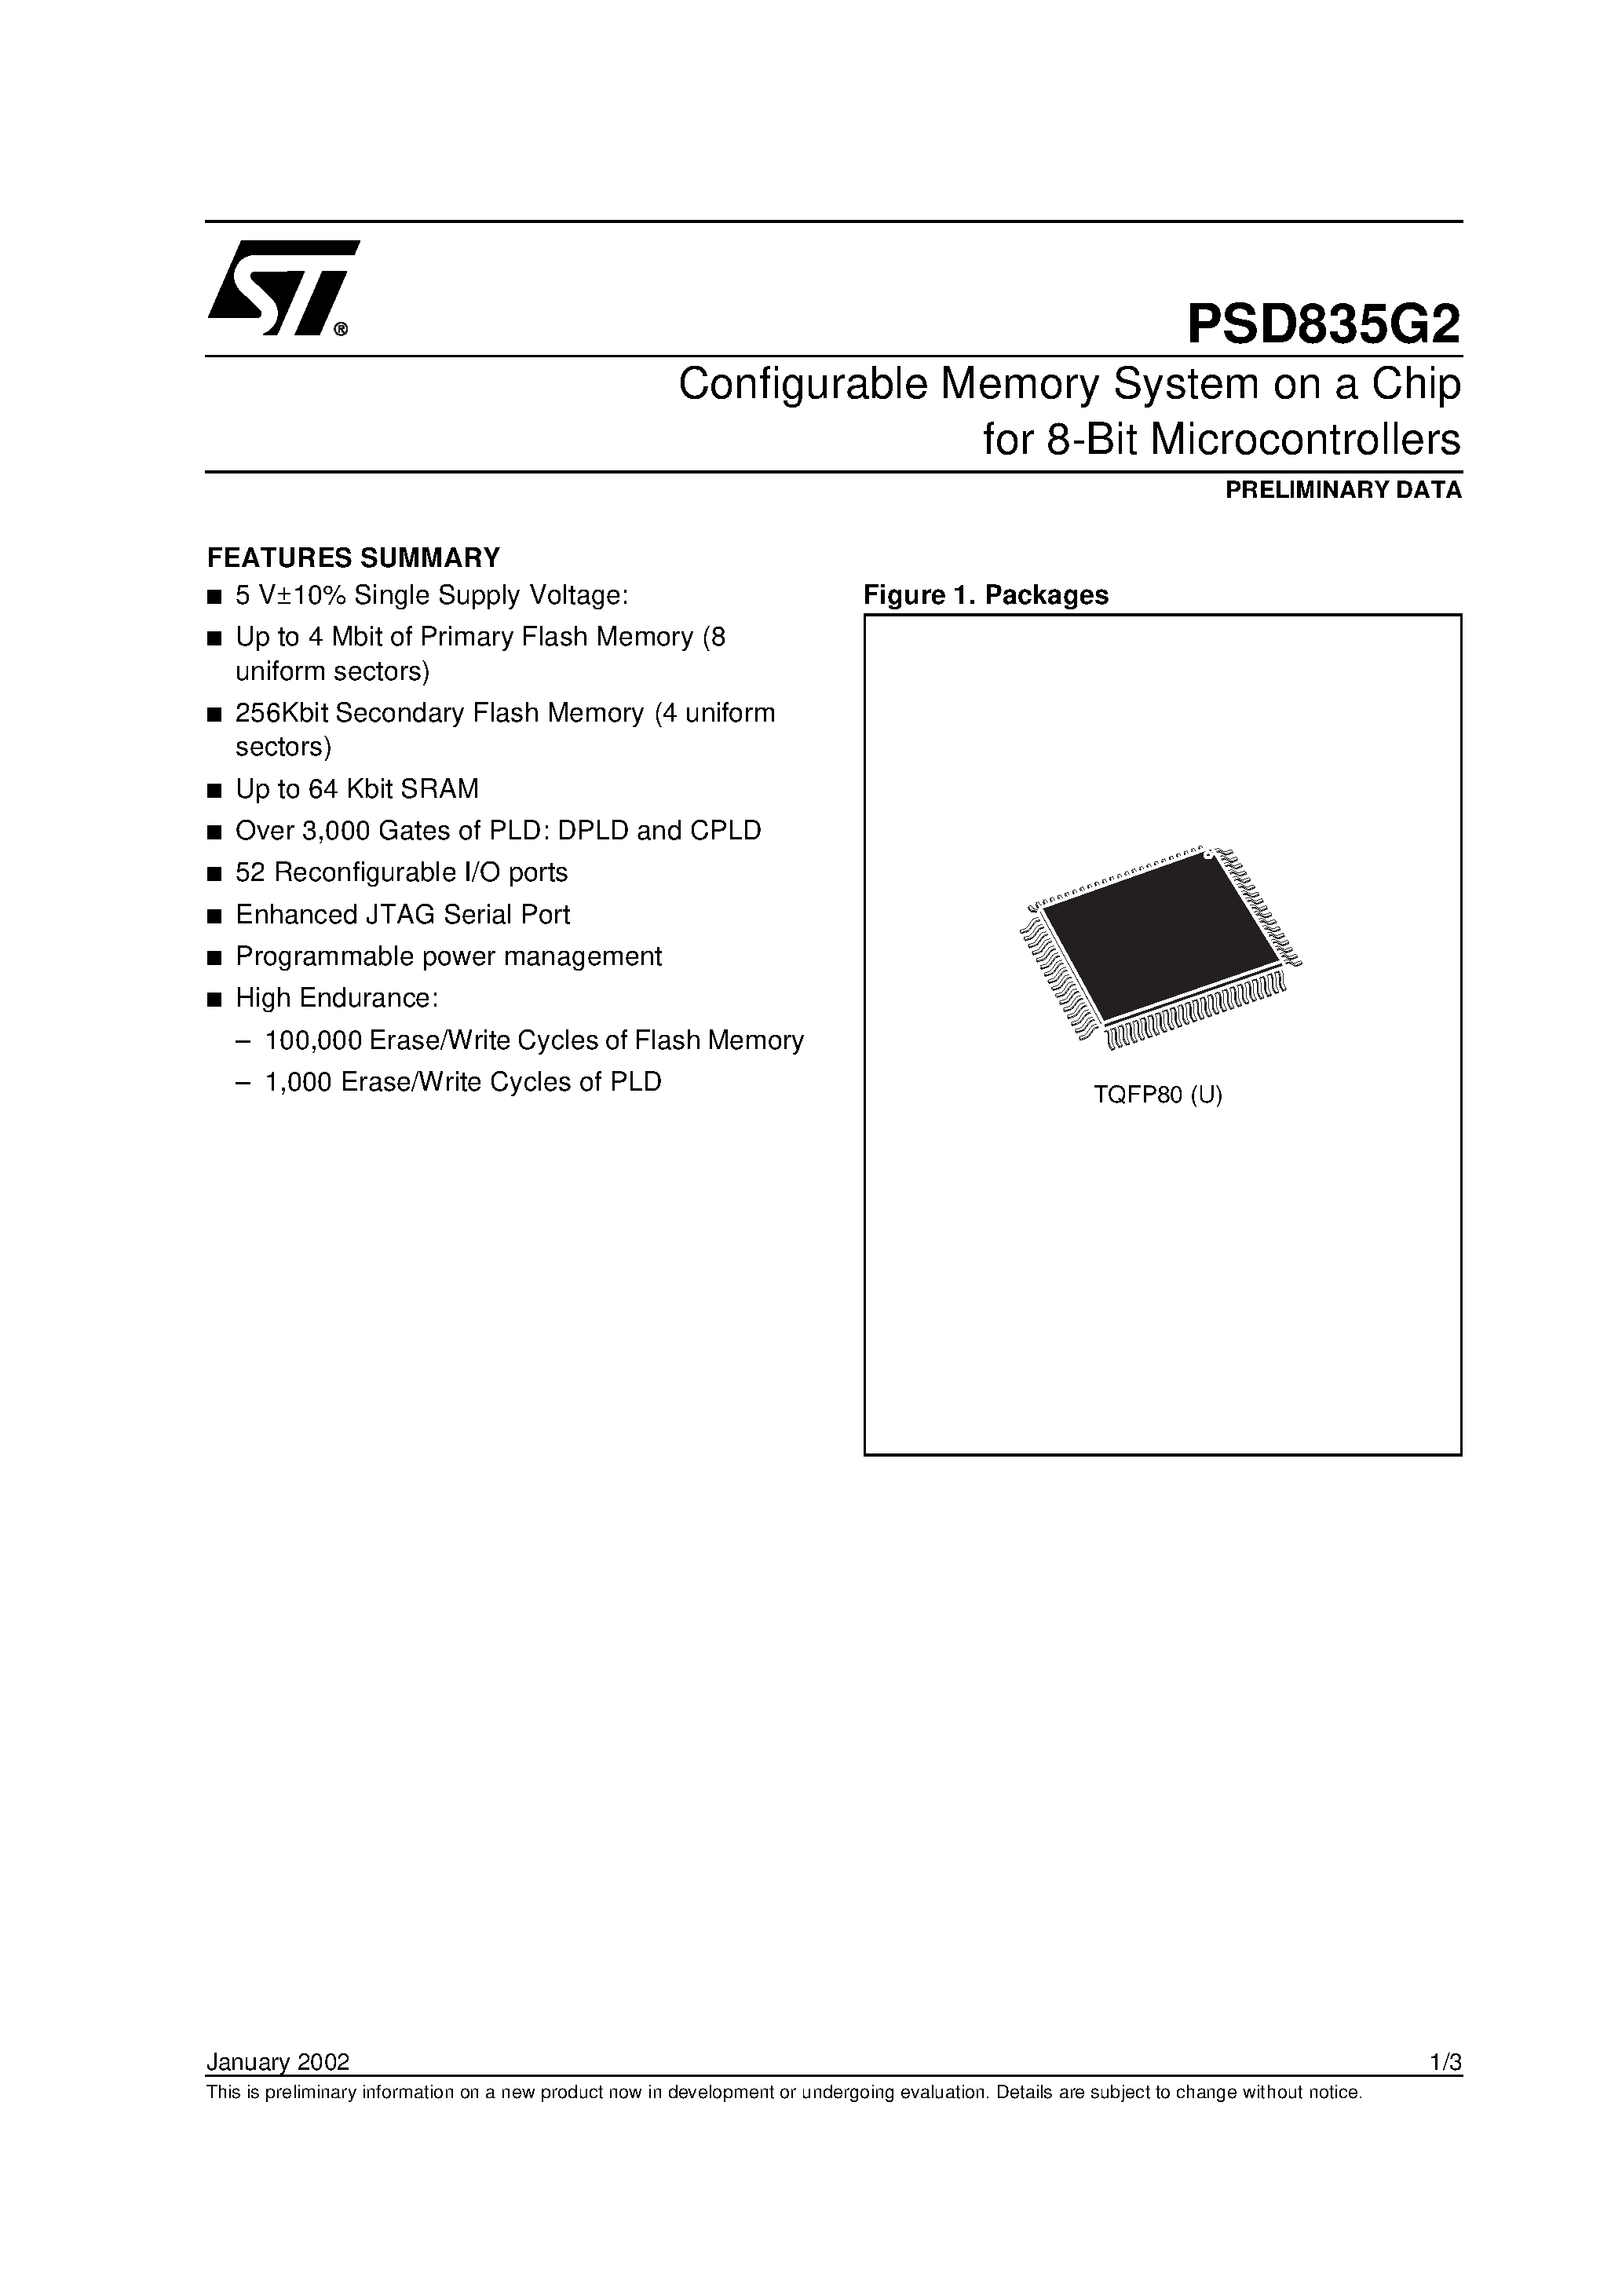 Datasheet PSD835F2-A-12J - Configurable Memory System on a Chip for 8-Bit Microcontrollers page 1